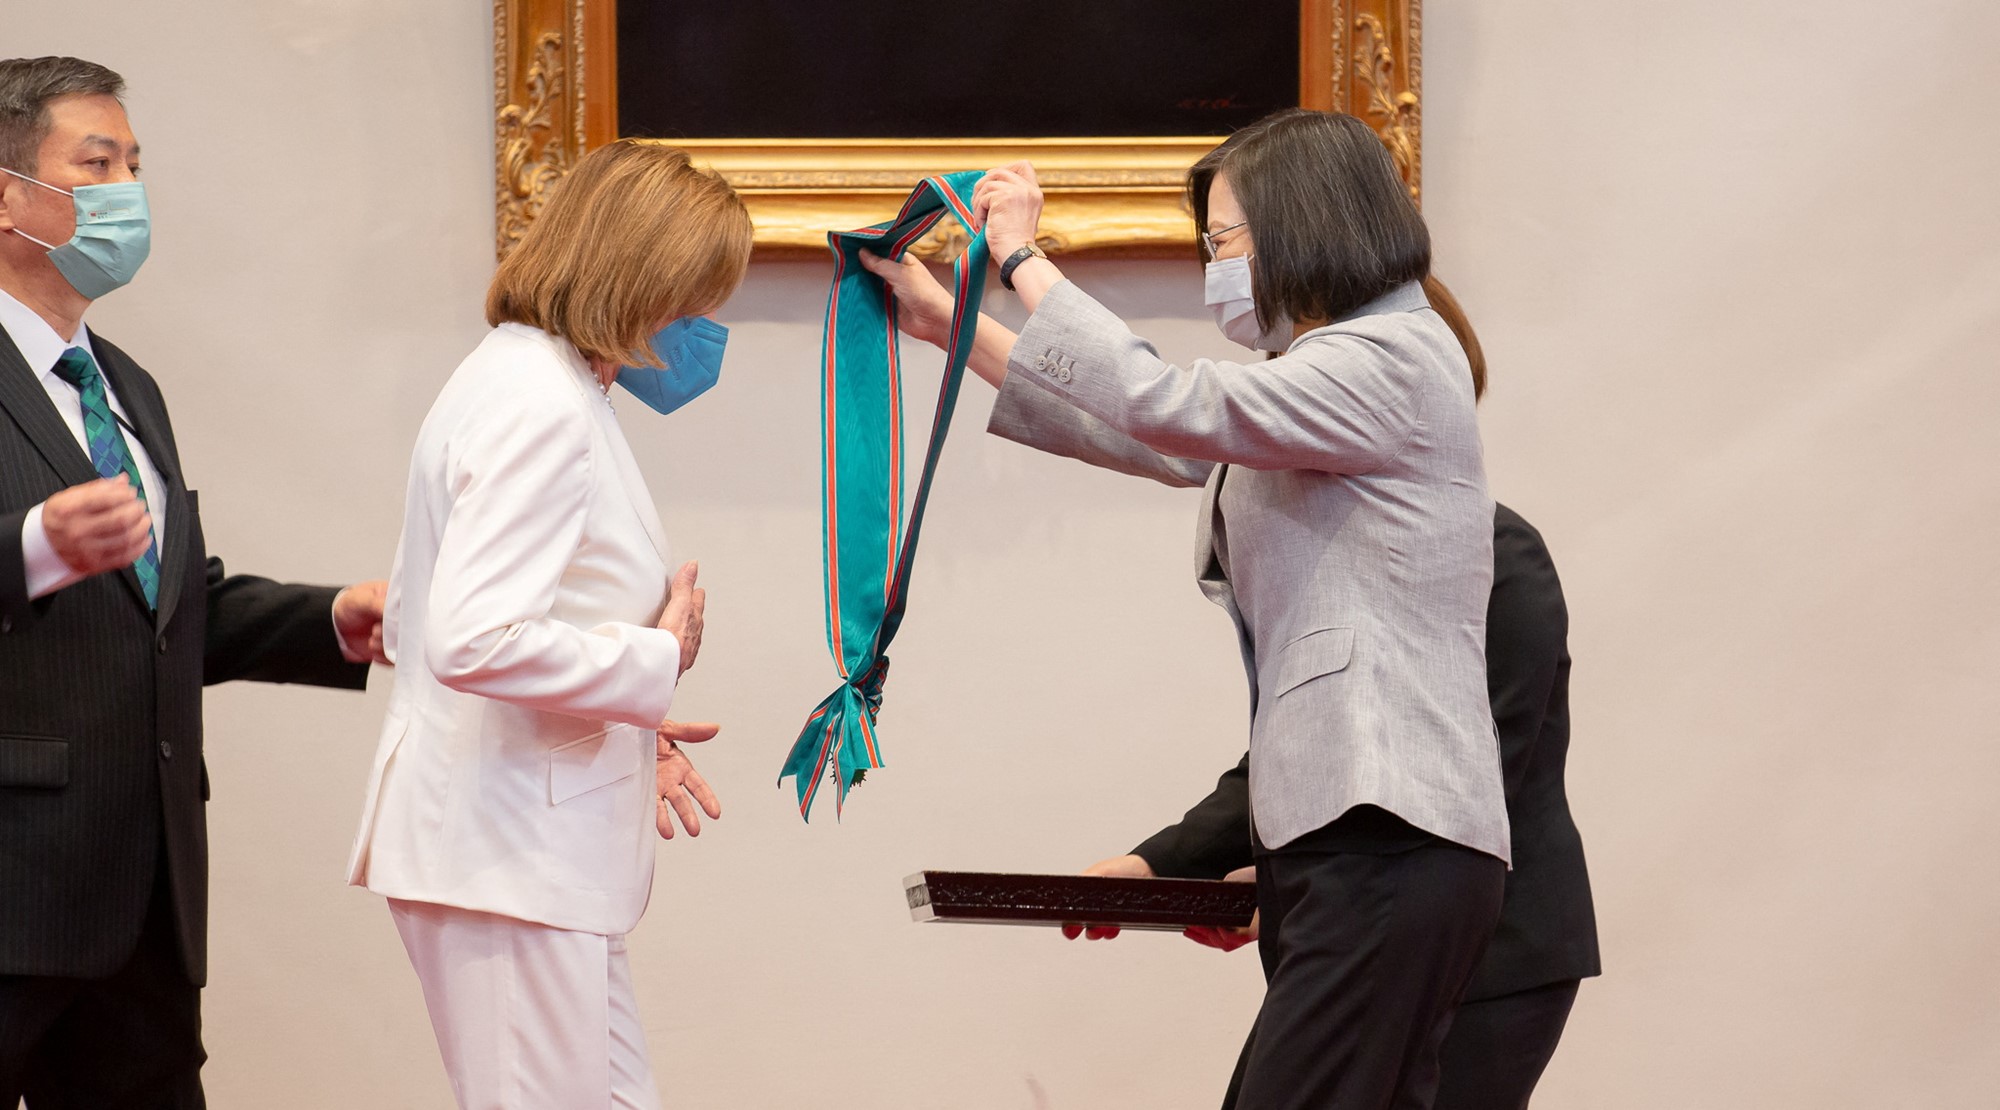 A woman presents another woman with a sash.